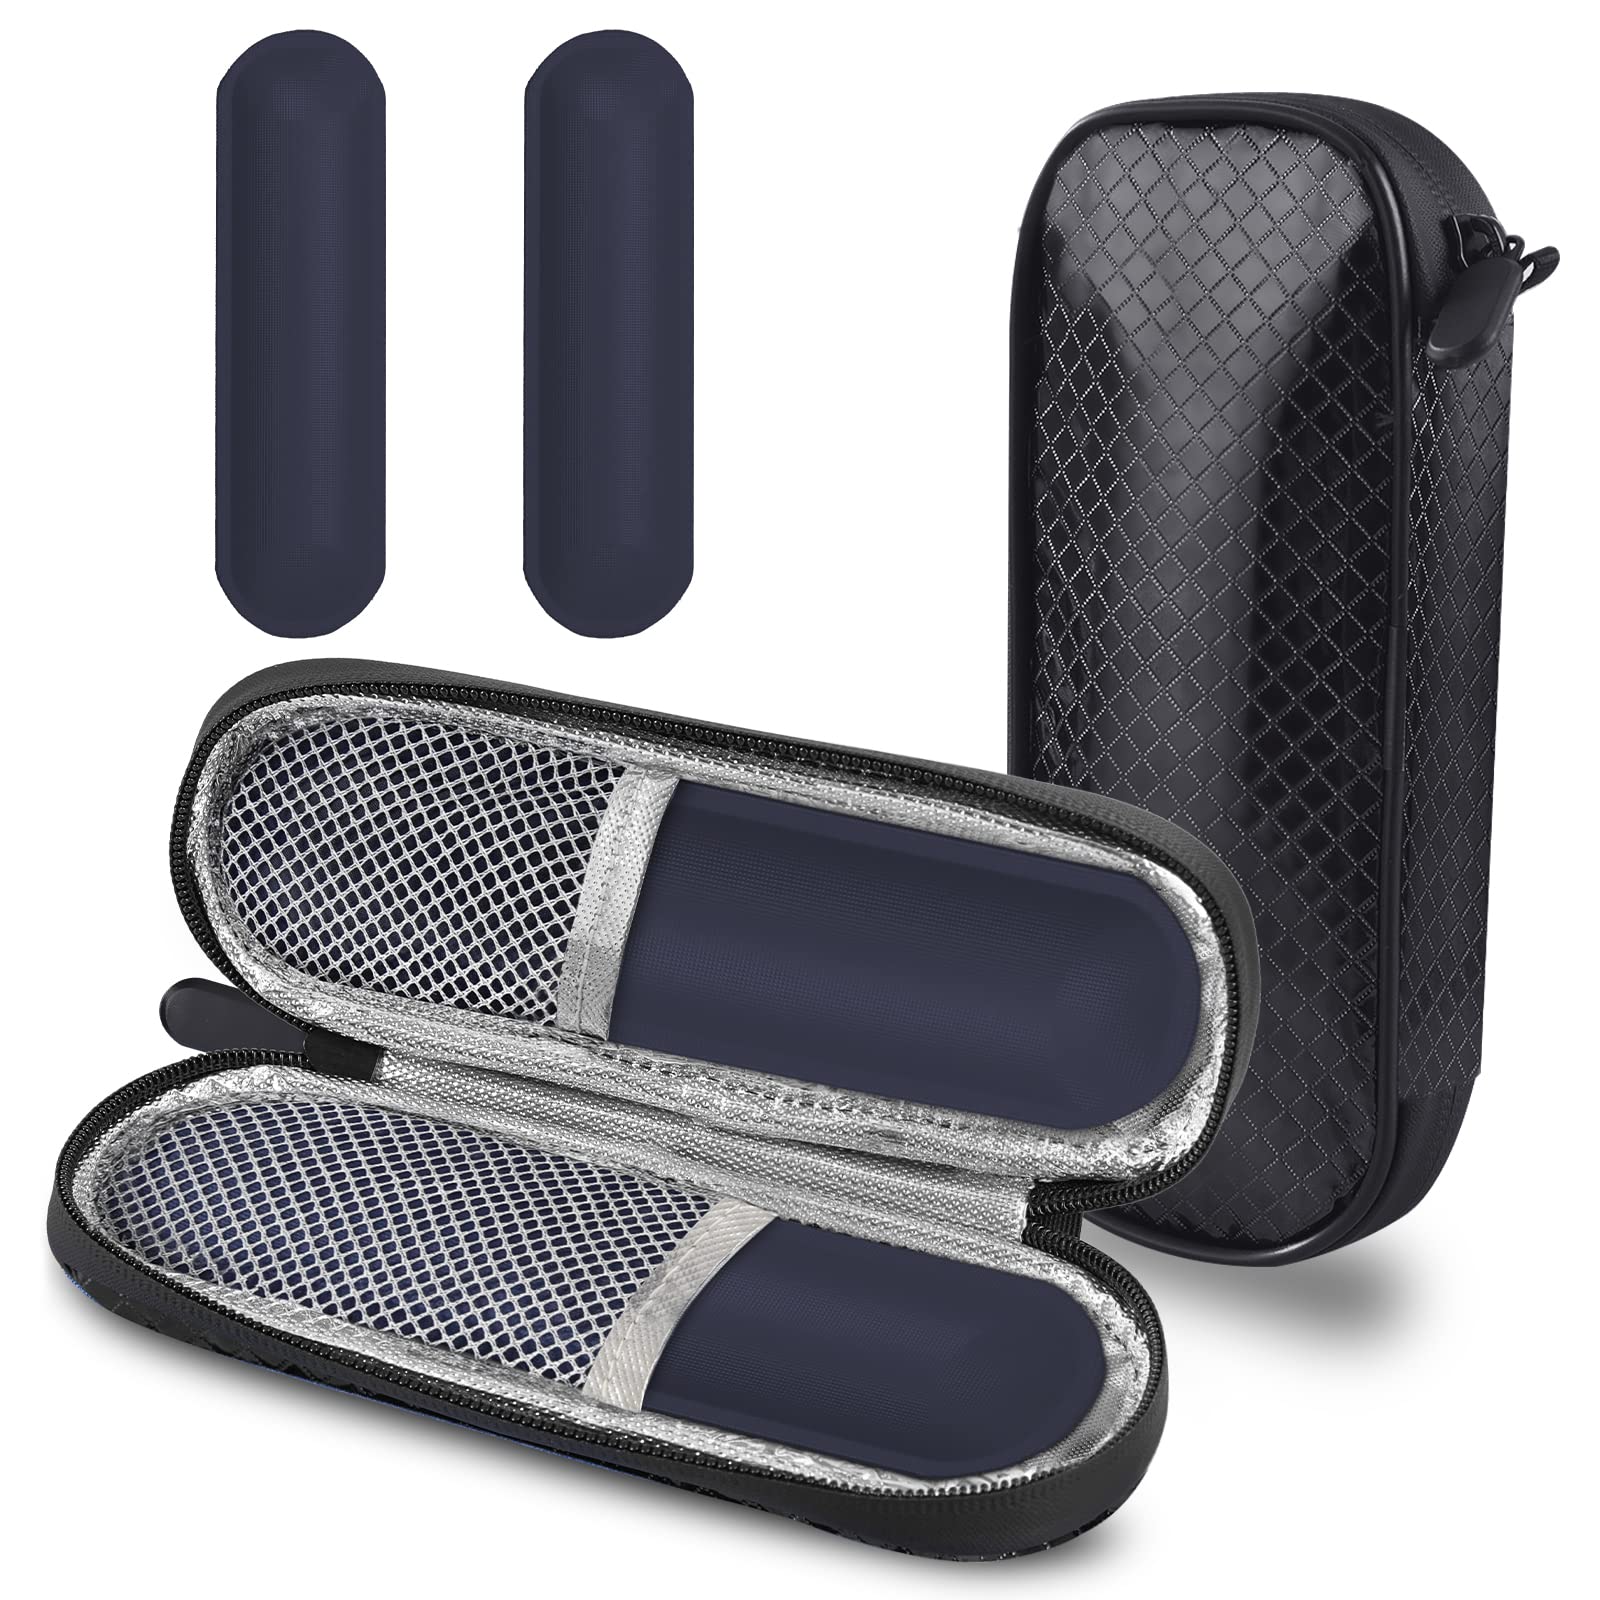 ChillMed Micro Cooler Diabetic Insulin Carrying Case - Group Medical Supply